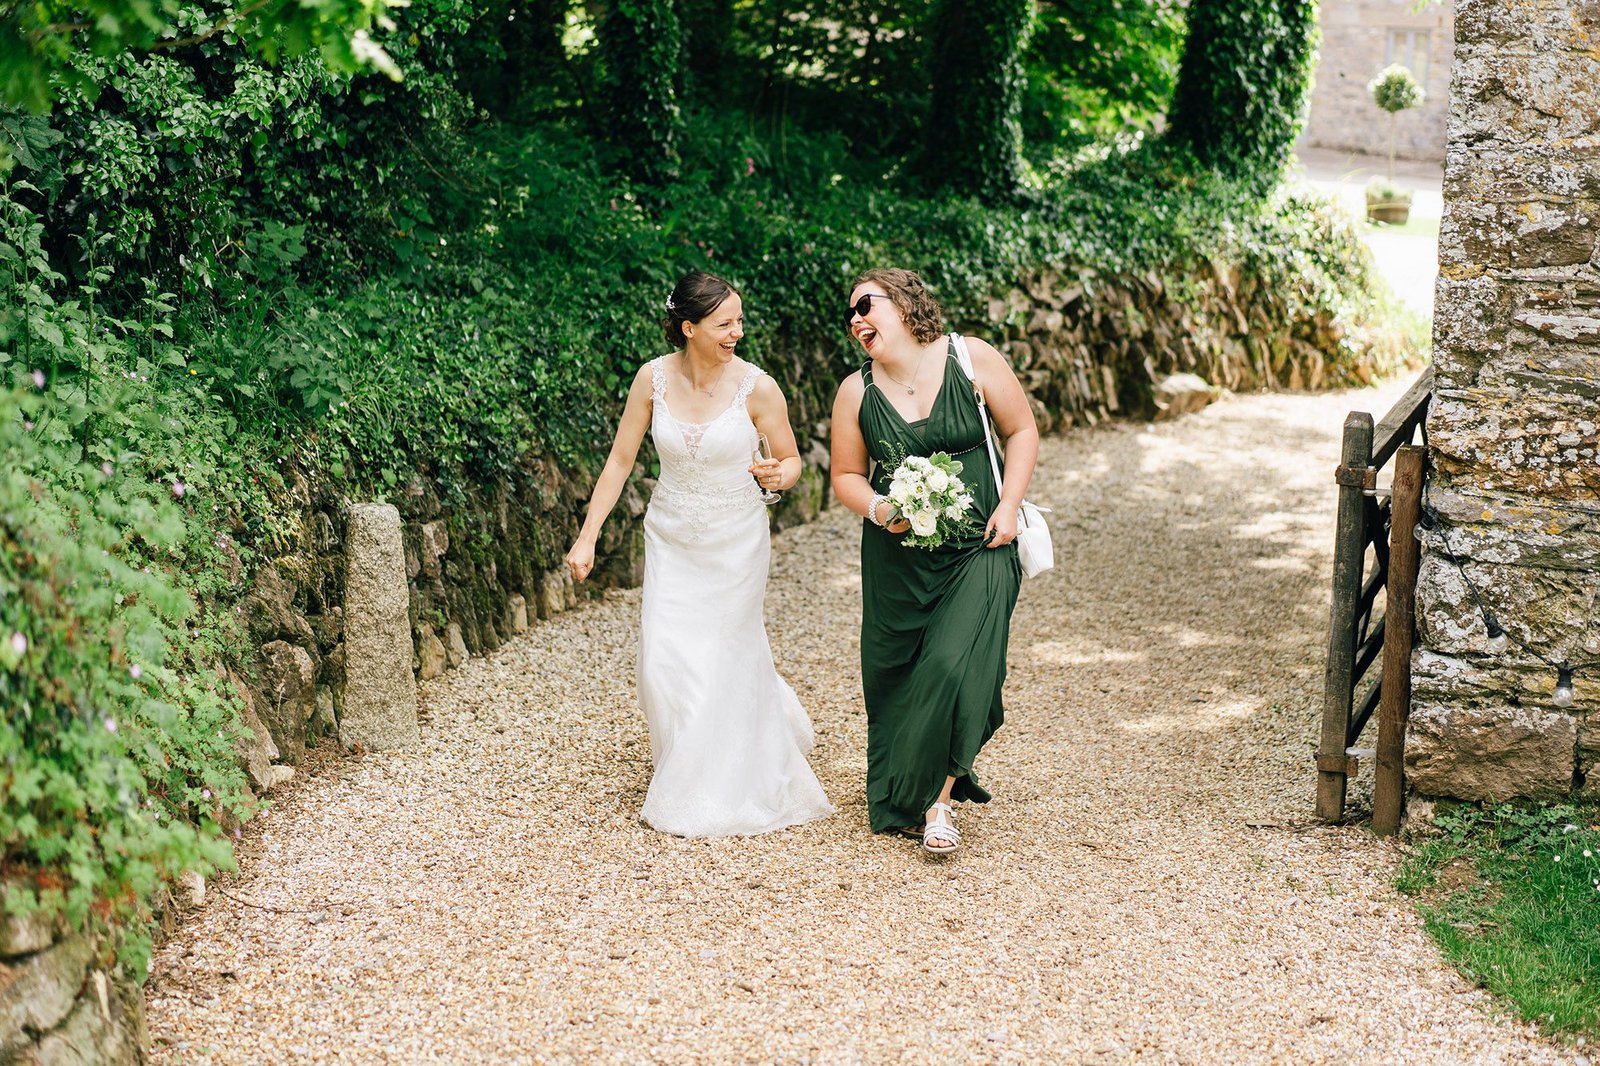 Younger Photography weddings at Hareston Manor